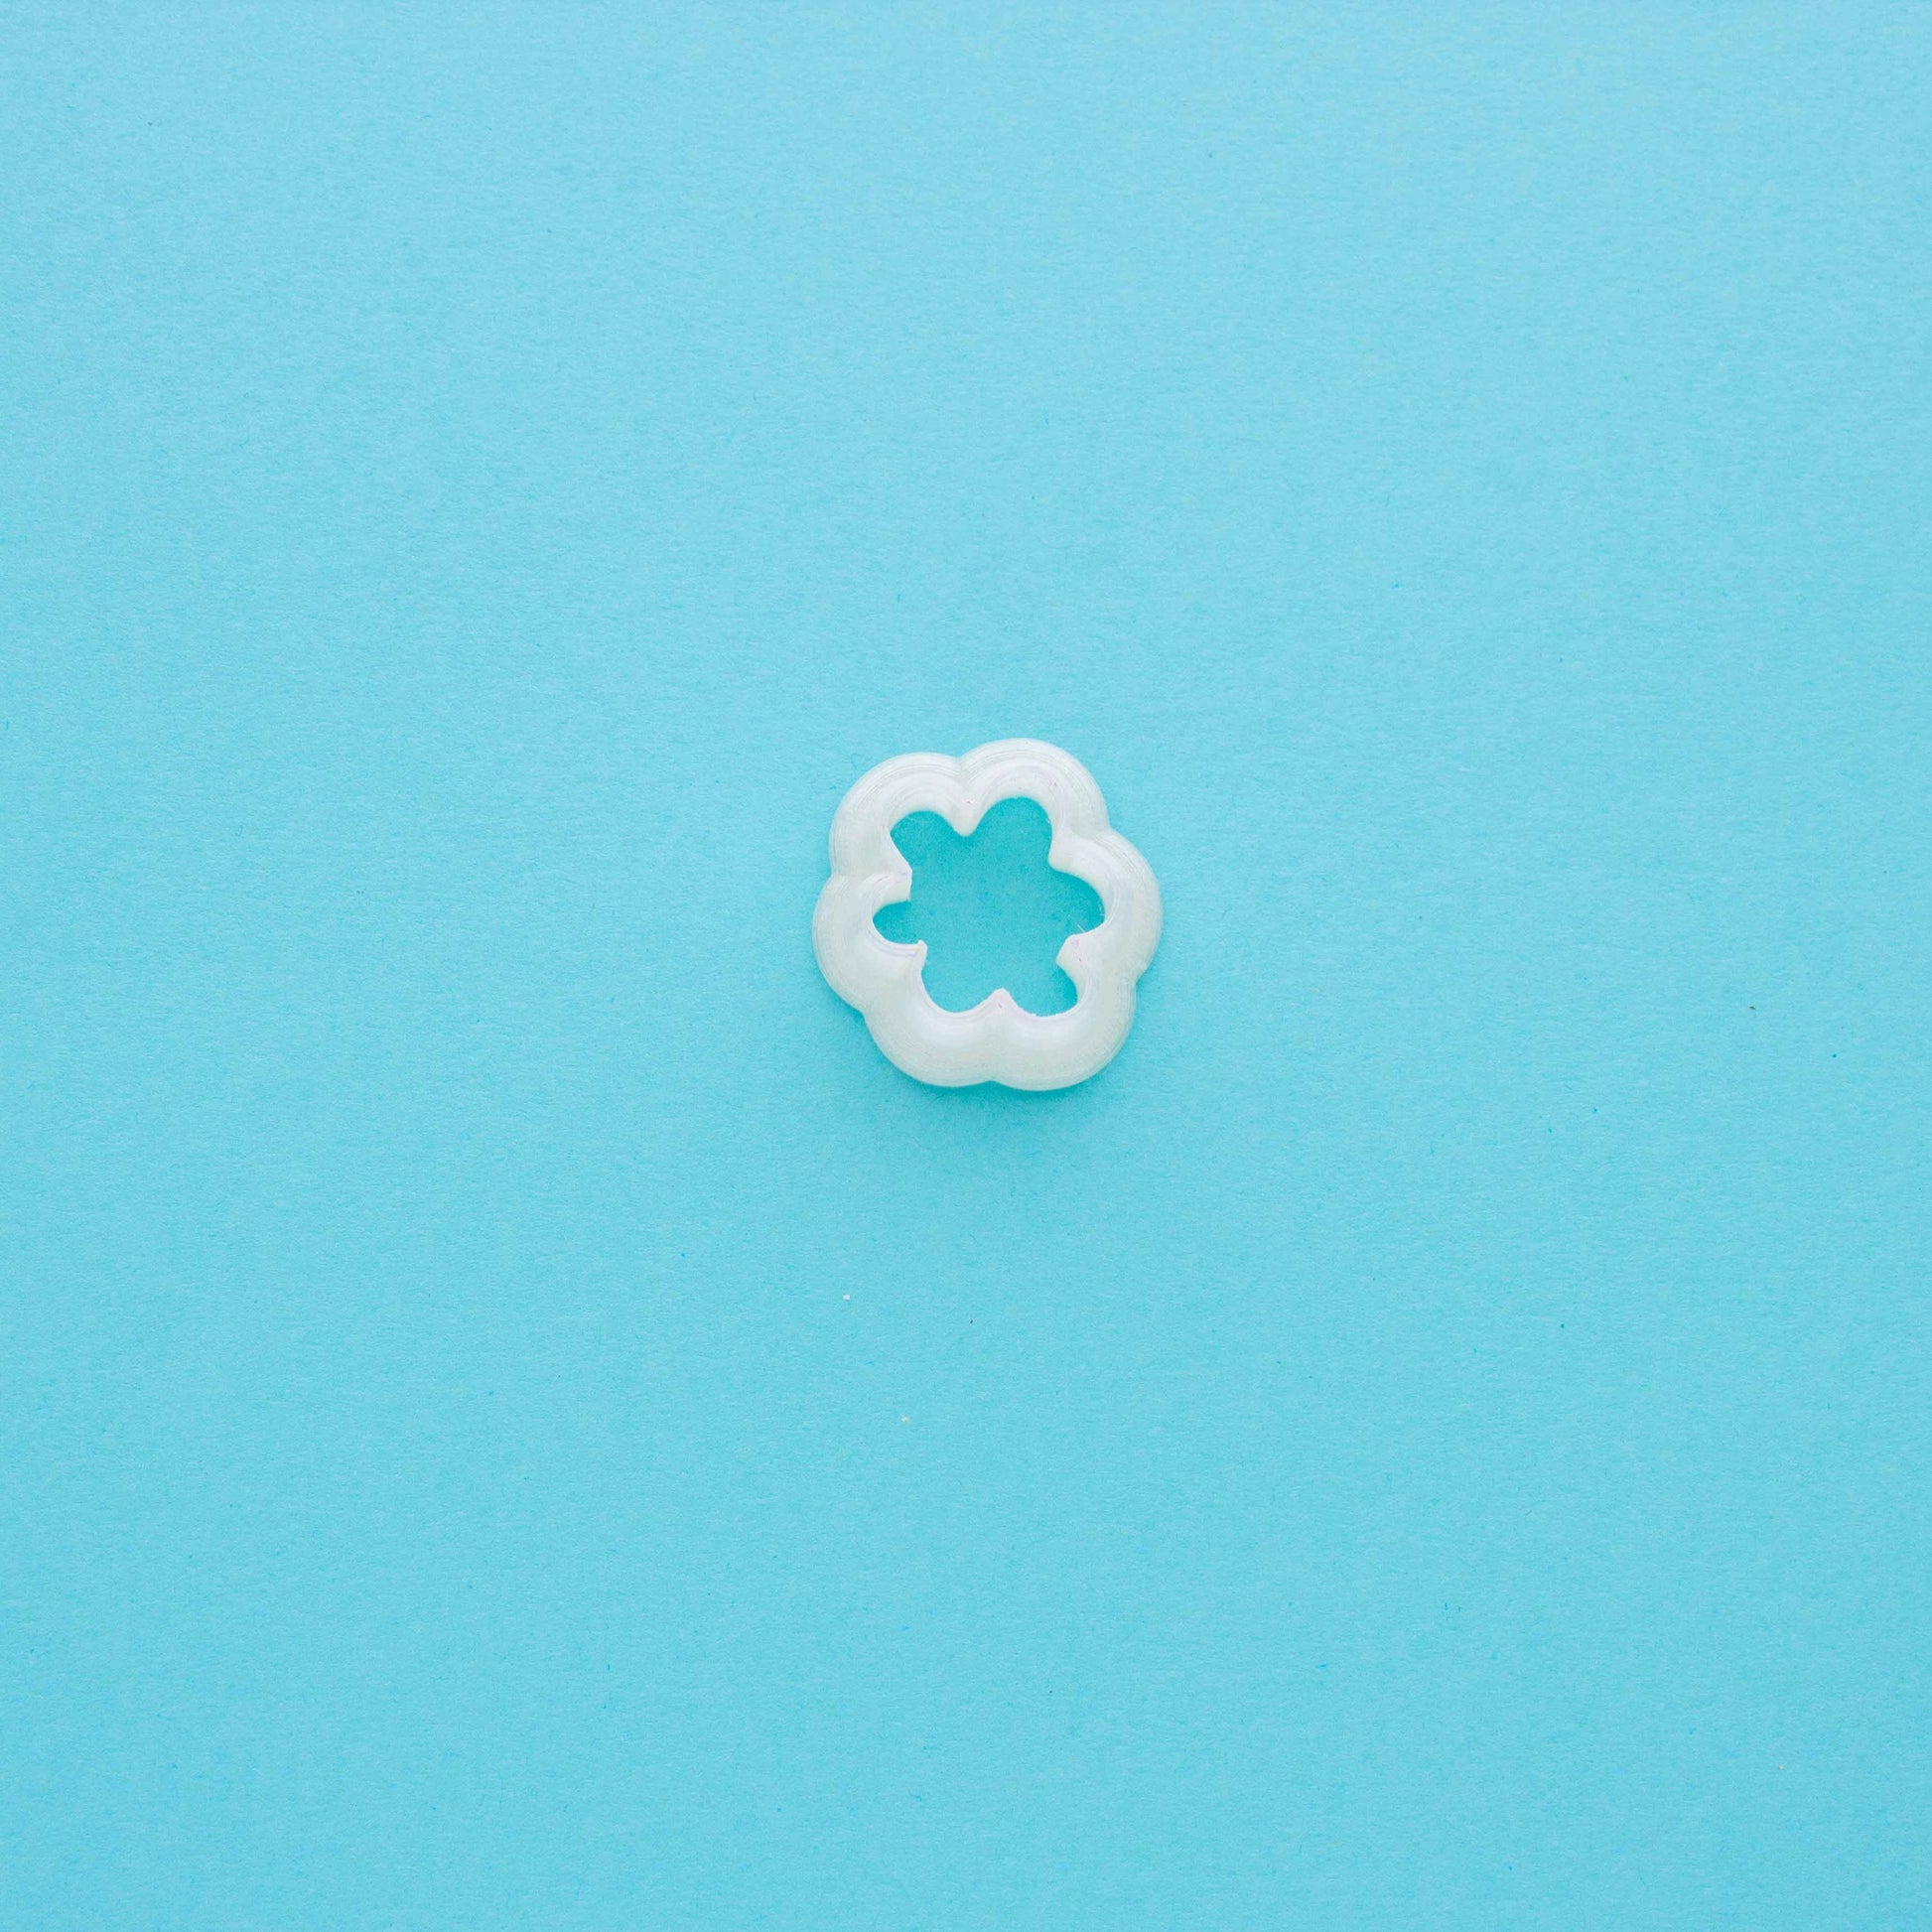 Small flower shaped polymer clay cutter